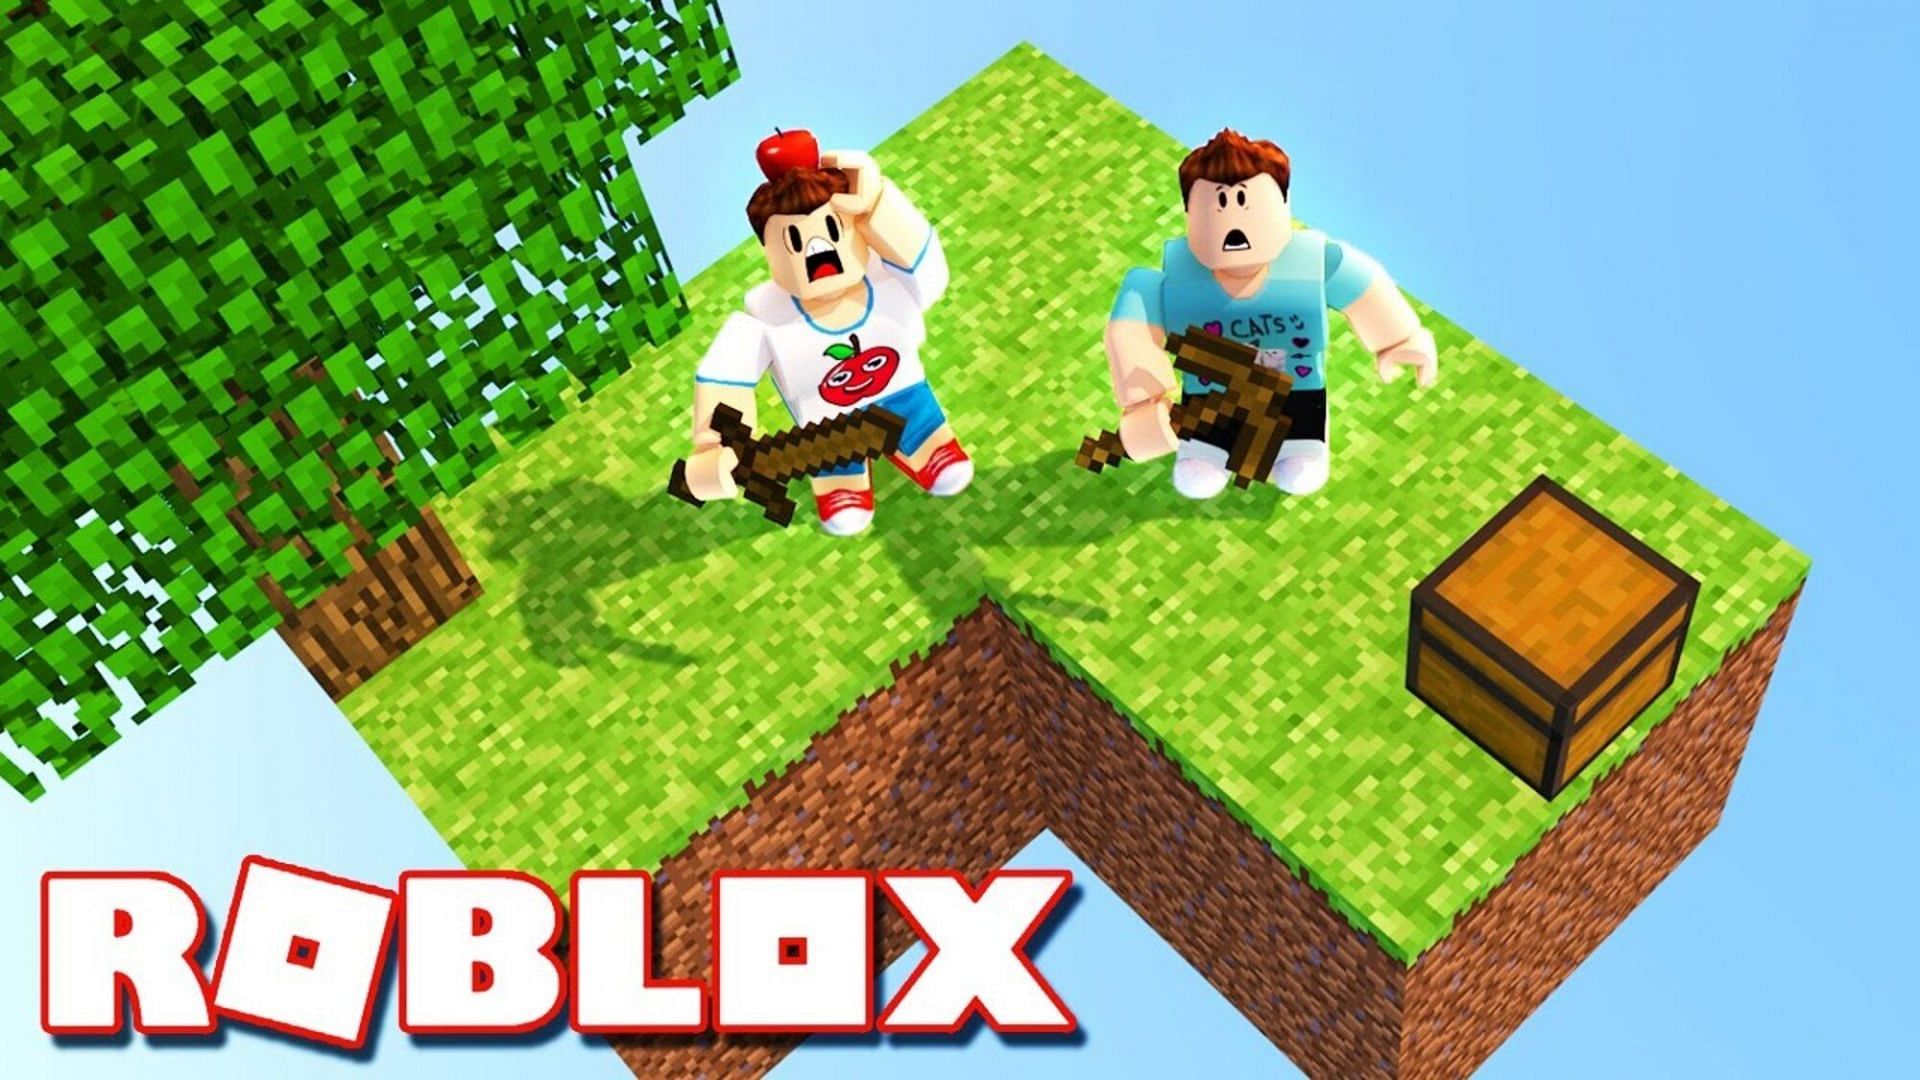 5 best Roblox games for fans of Minecraft (July 2022)